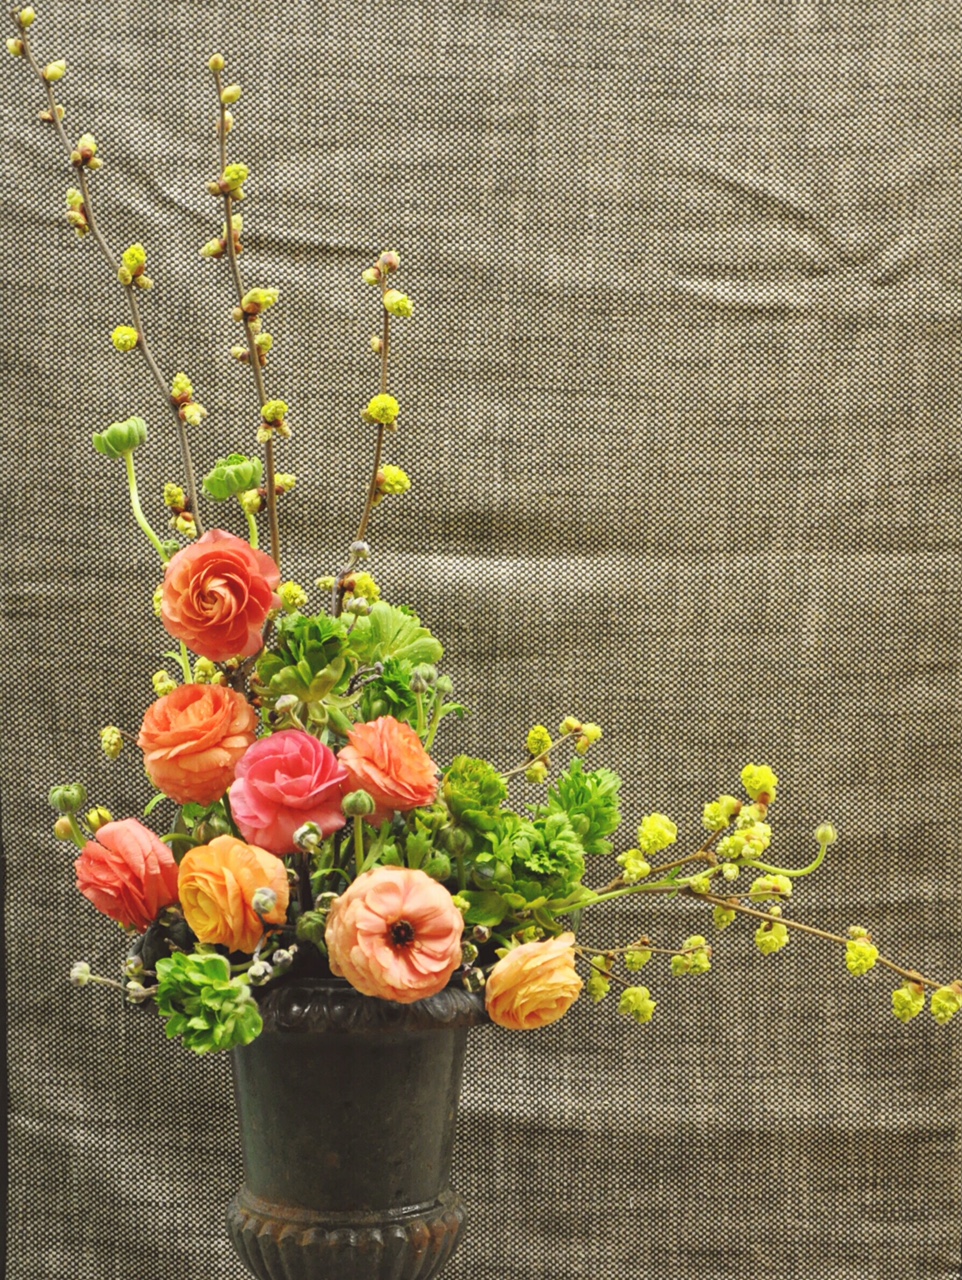 Floral arrangement by Kathleen Mccoy - Our Status Was Provisional - Making it in the Garden Club